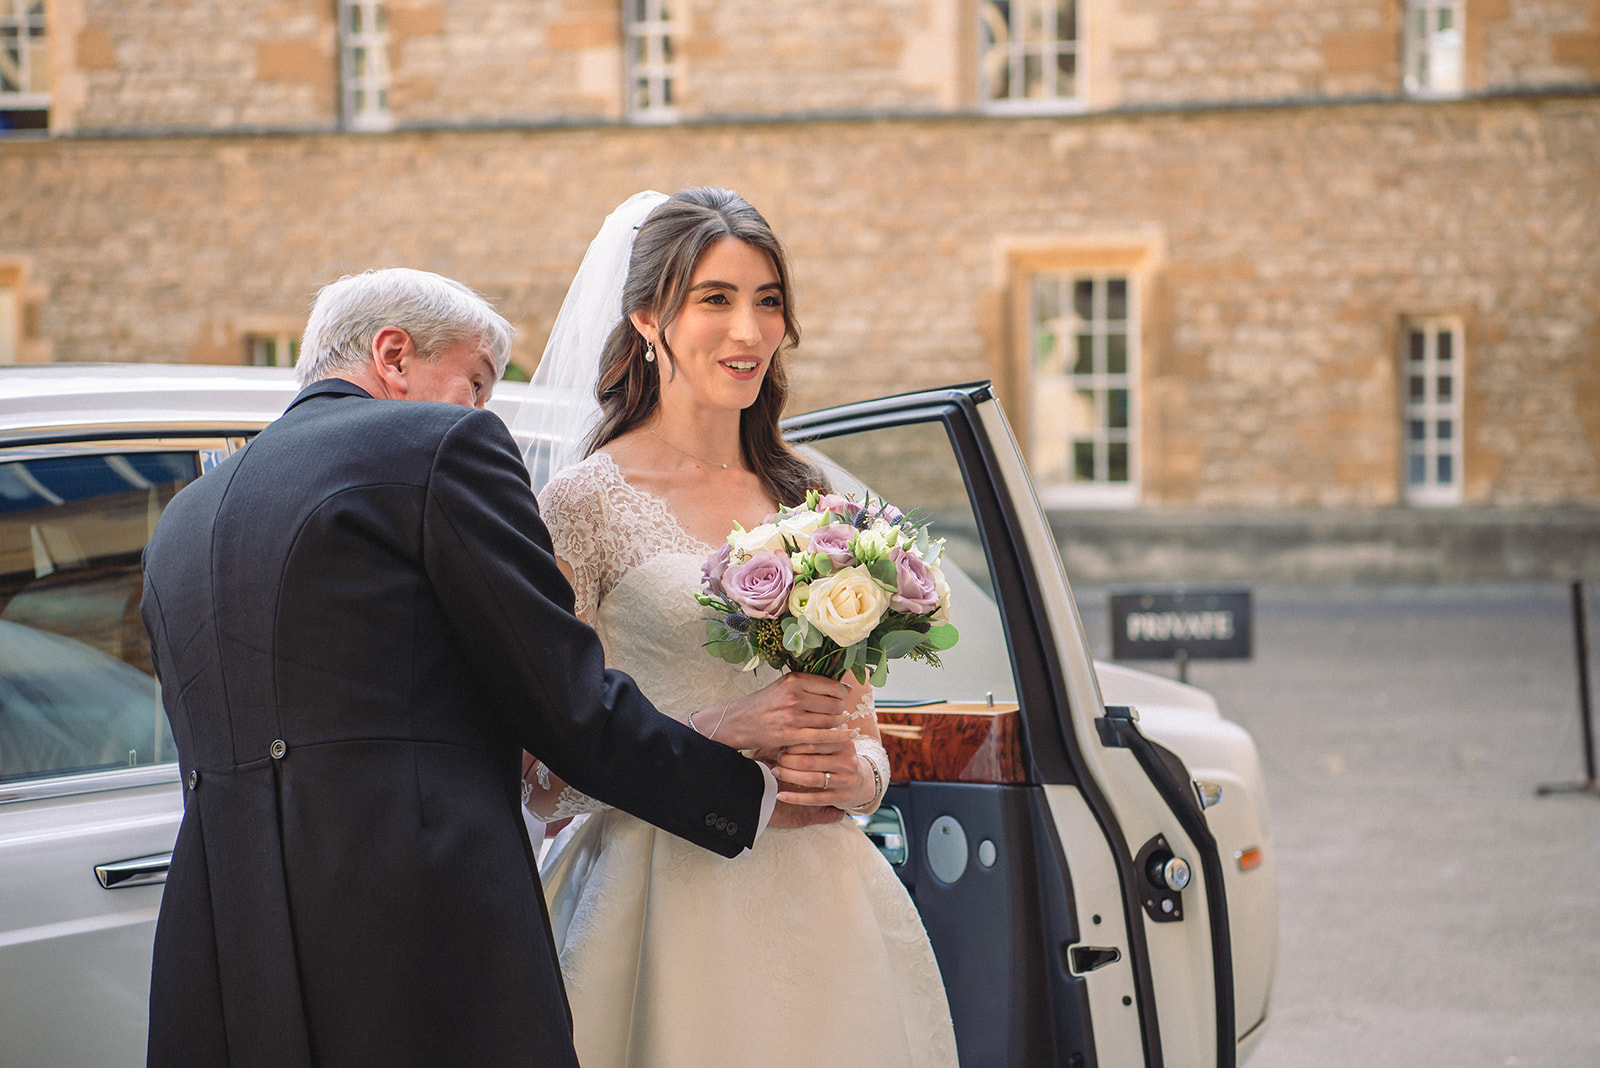 Katherine arriving at the New College Chapel